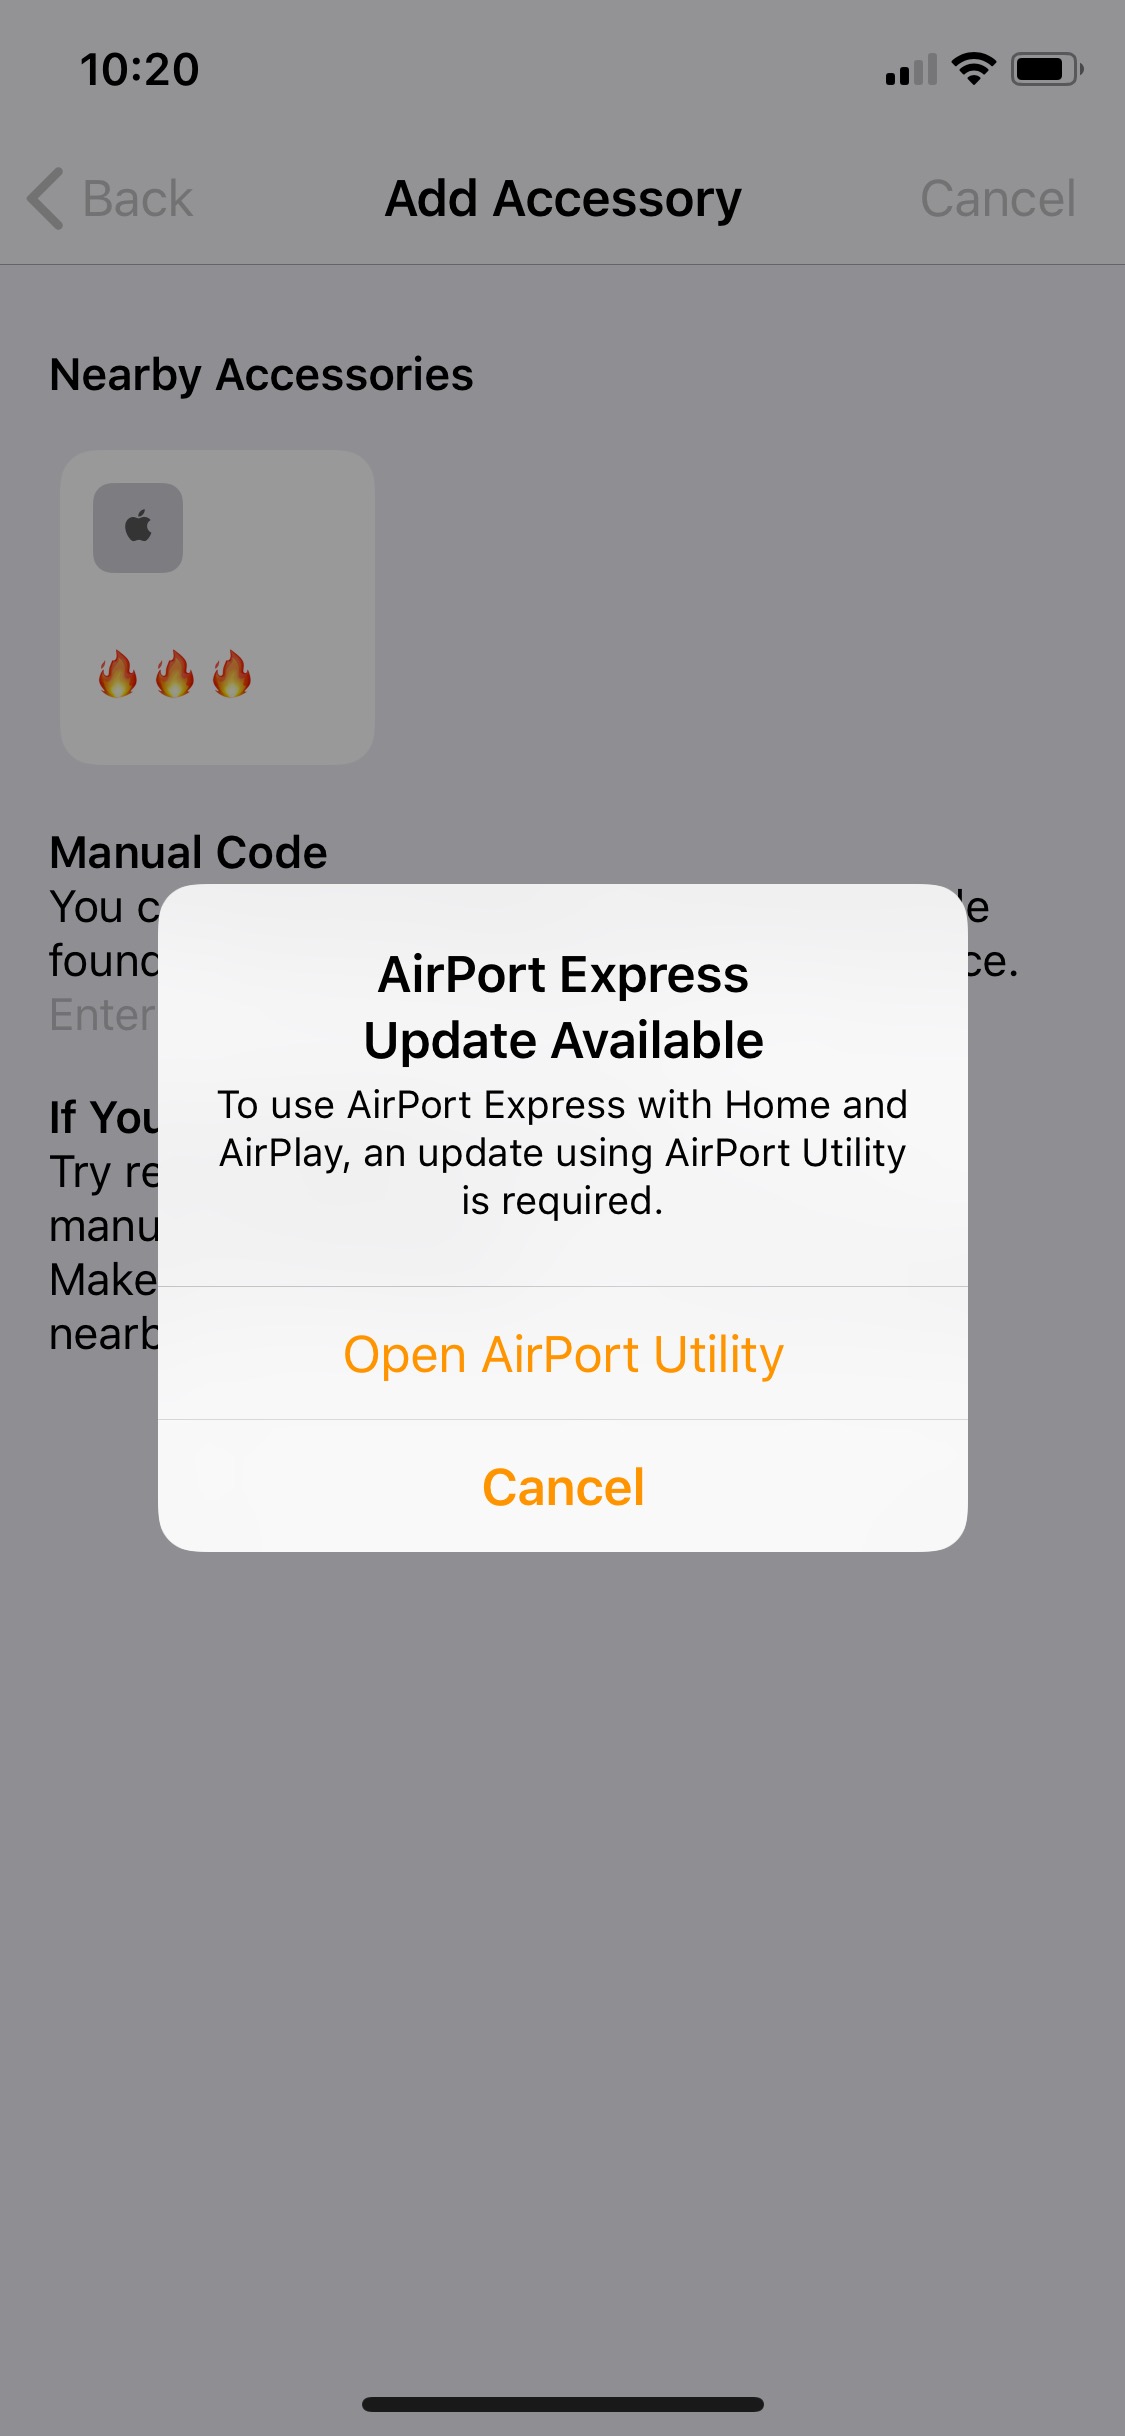 iOS 12 Beta 2 Hints at AirPlay 2 Support for AirPort Express